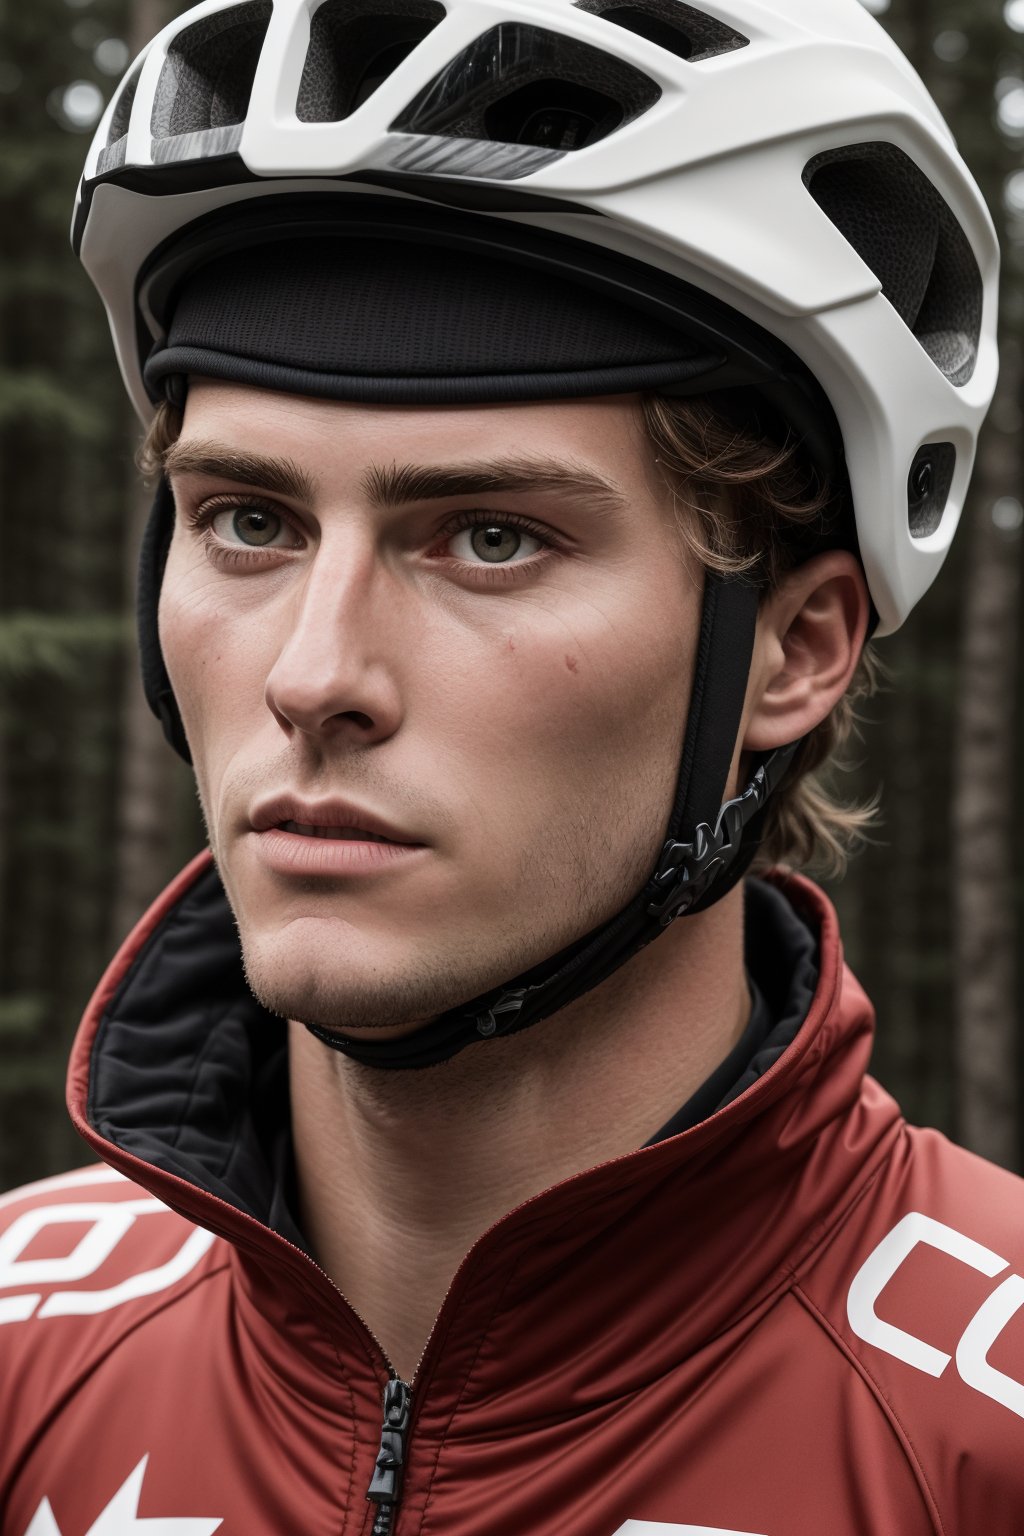 (best quality, masterpiece, ultra quality), UHD quality, RAW, 1 man Loïc Bruni is a French athlete who competes in mountain biking in the downhill discipline. He won five gold medals in the World Mountain Bike Championships, between the years 2015 and 2022.
The character should have detailed skin texture, well-defined hands, reflect realism. Her face should show symmetry in her physical features and should have a serious but friendly expression. Eyes, realistic eyeballs, symmetrical eyeballs, small eyeballs.
